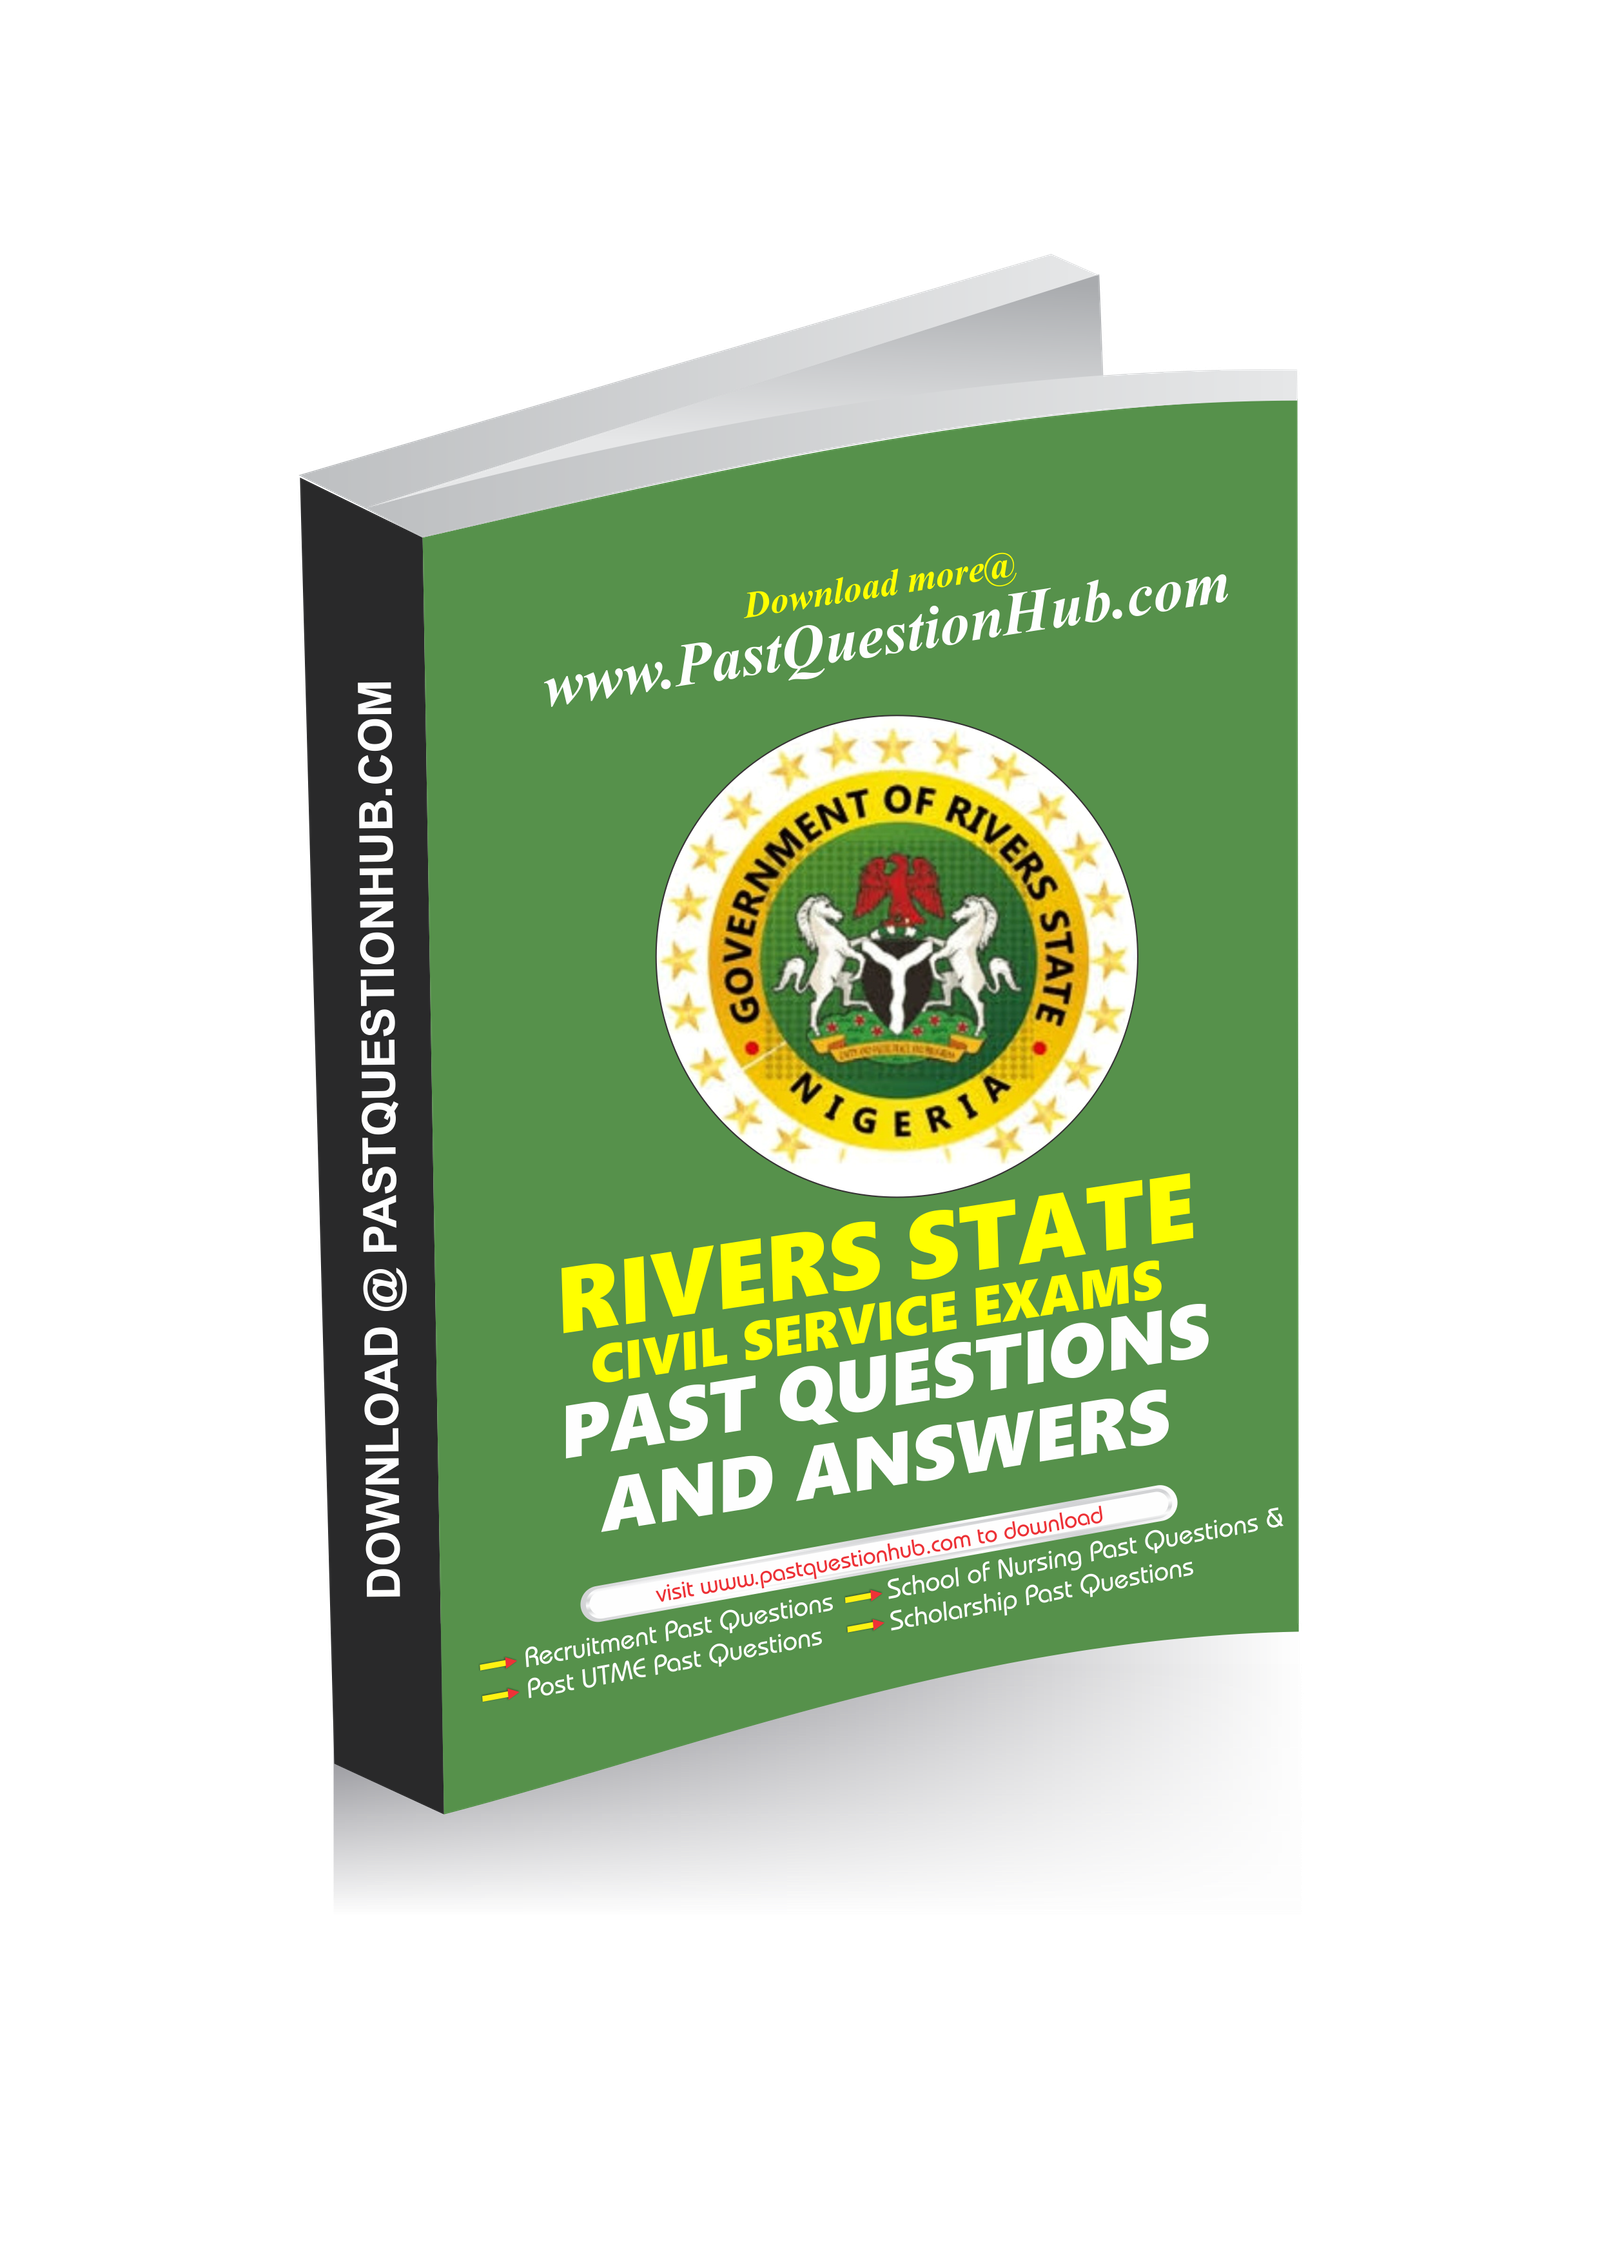 rivers-state-civil-service-past-questions-and-answers-pdf-2022